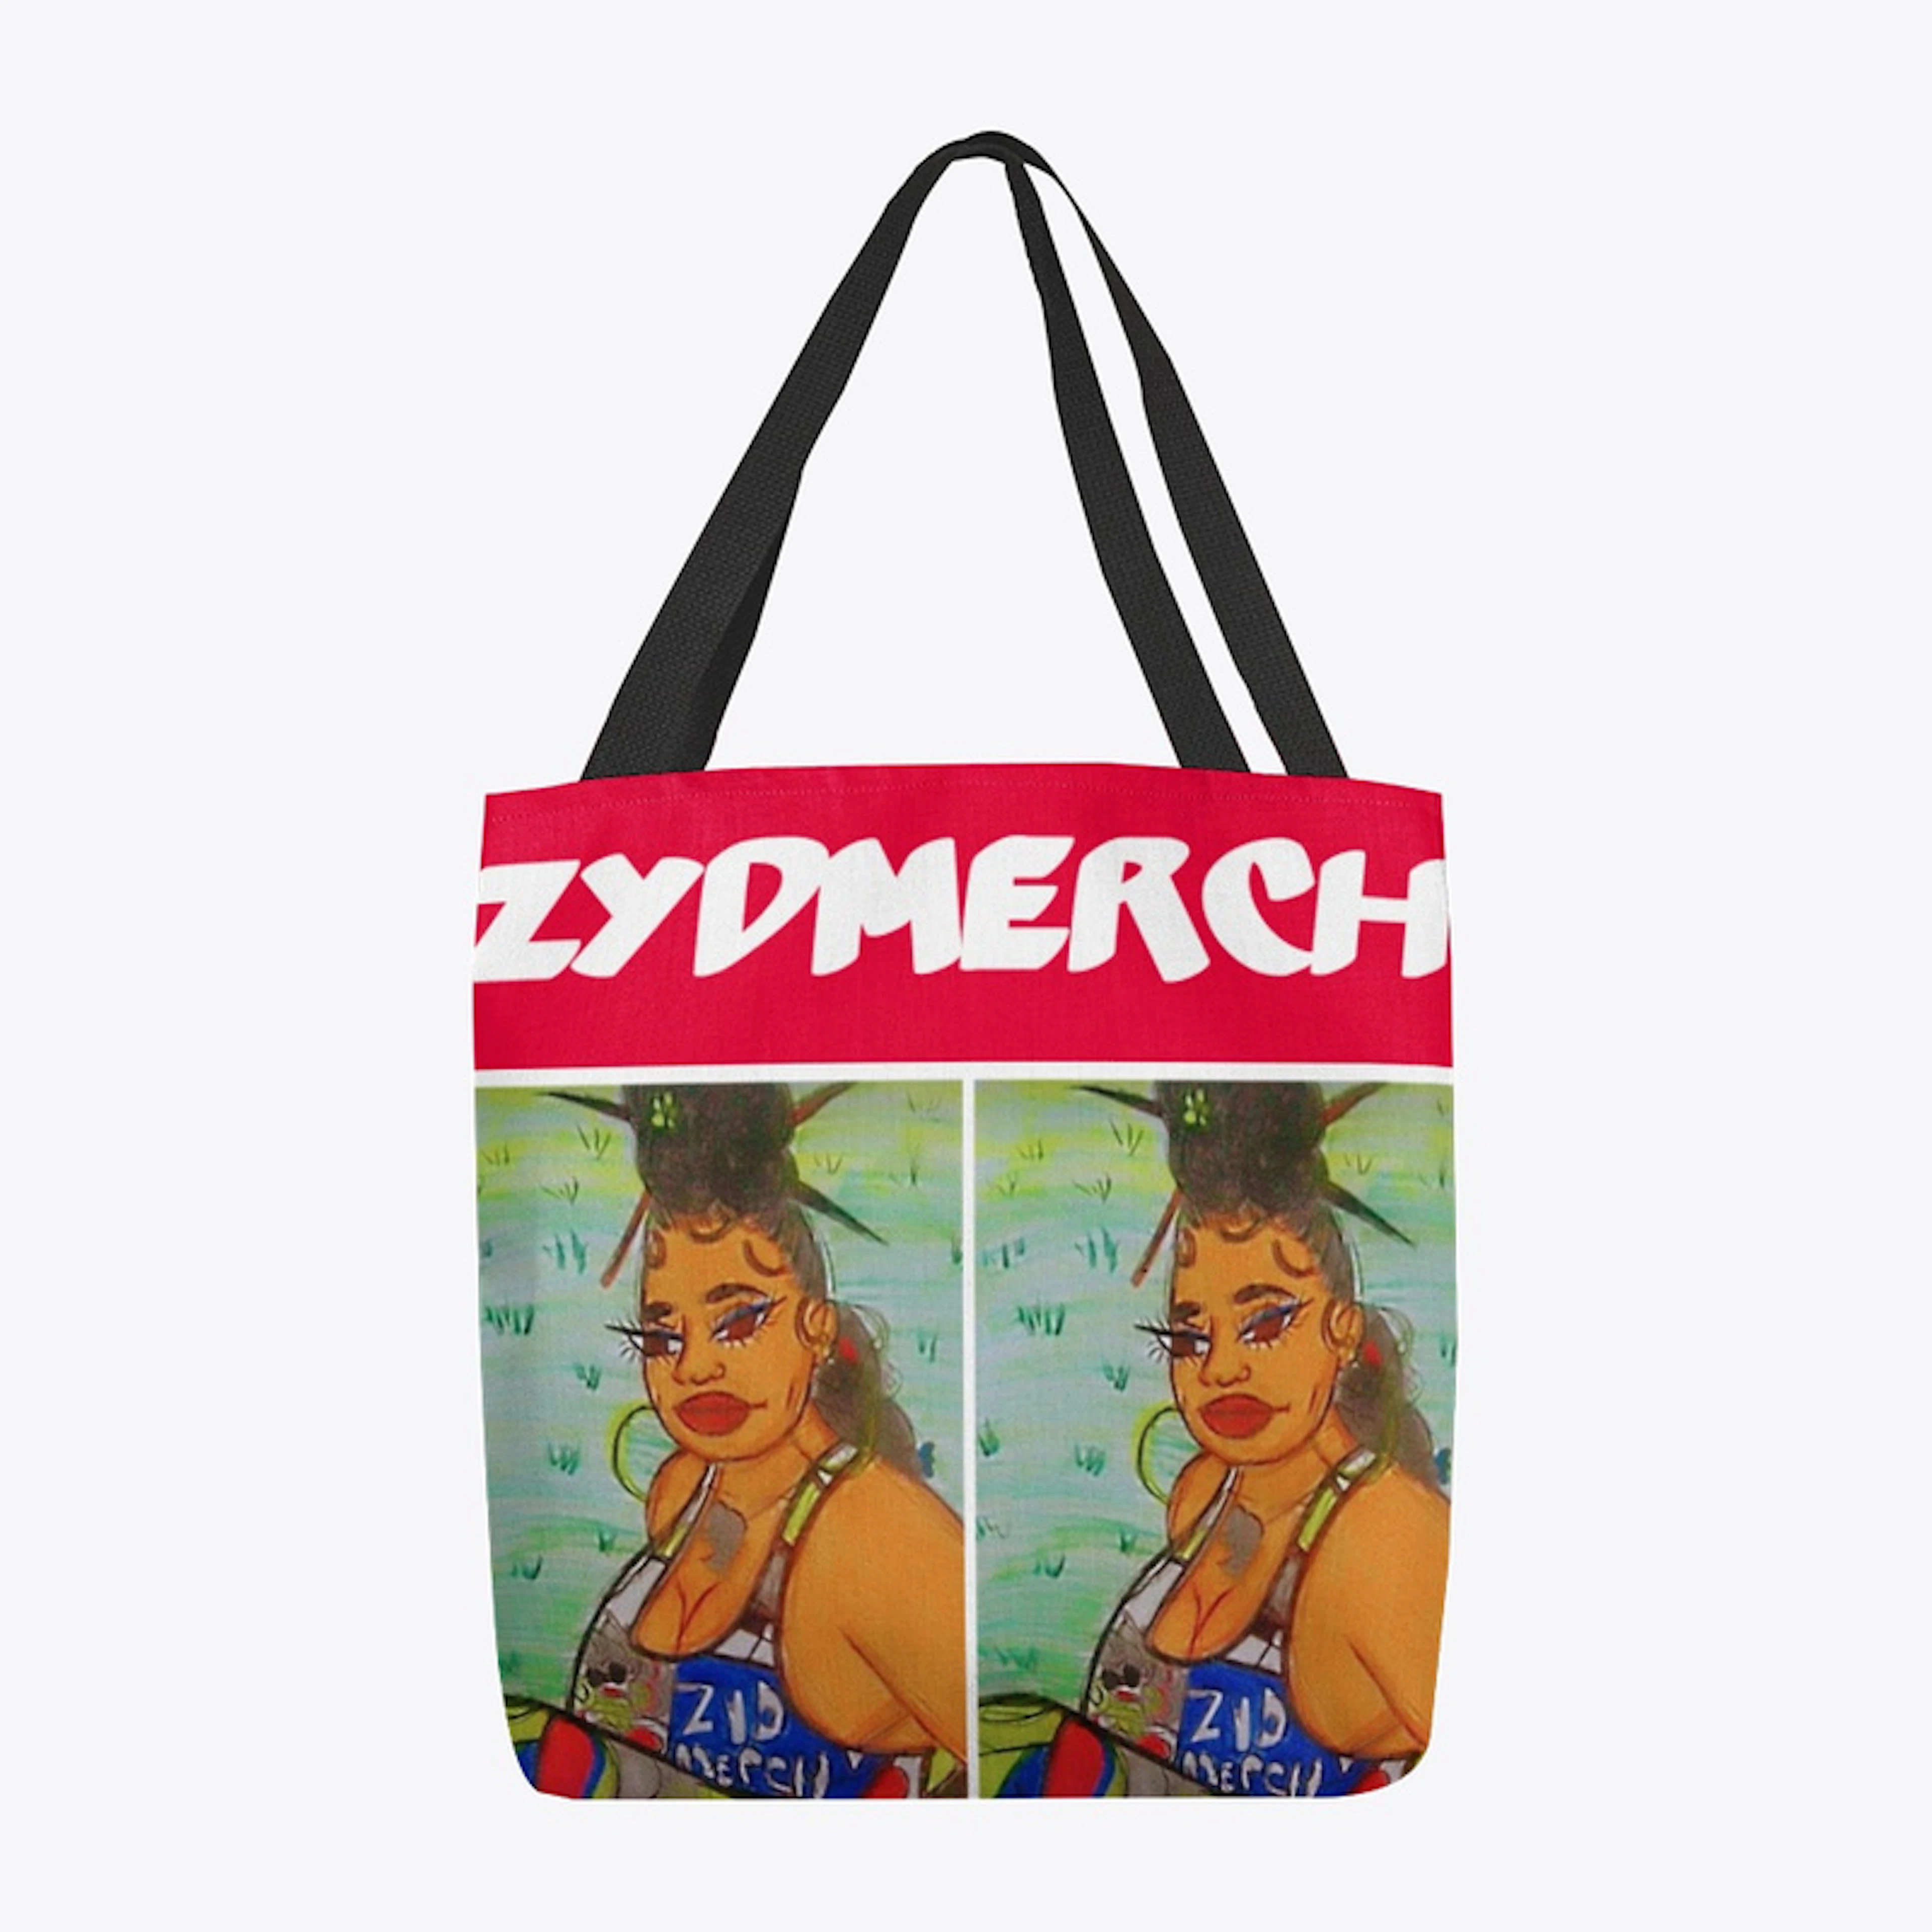 ZYDMERCH "MEET THE OWNER" COLLECTION 